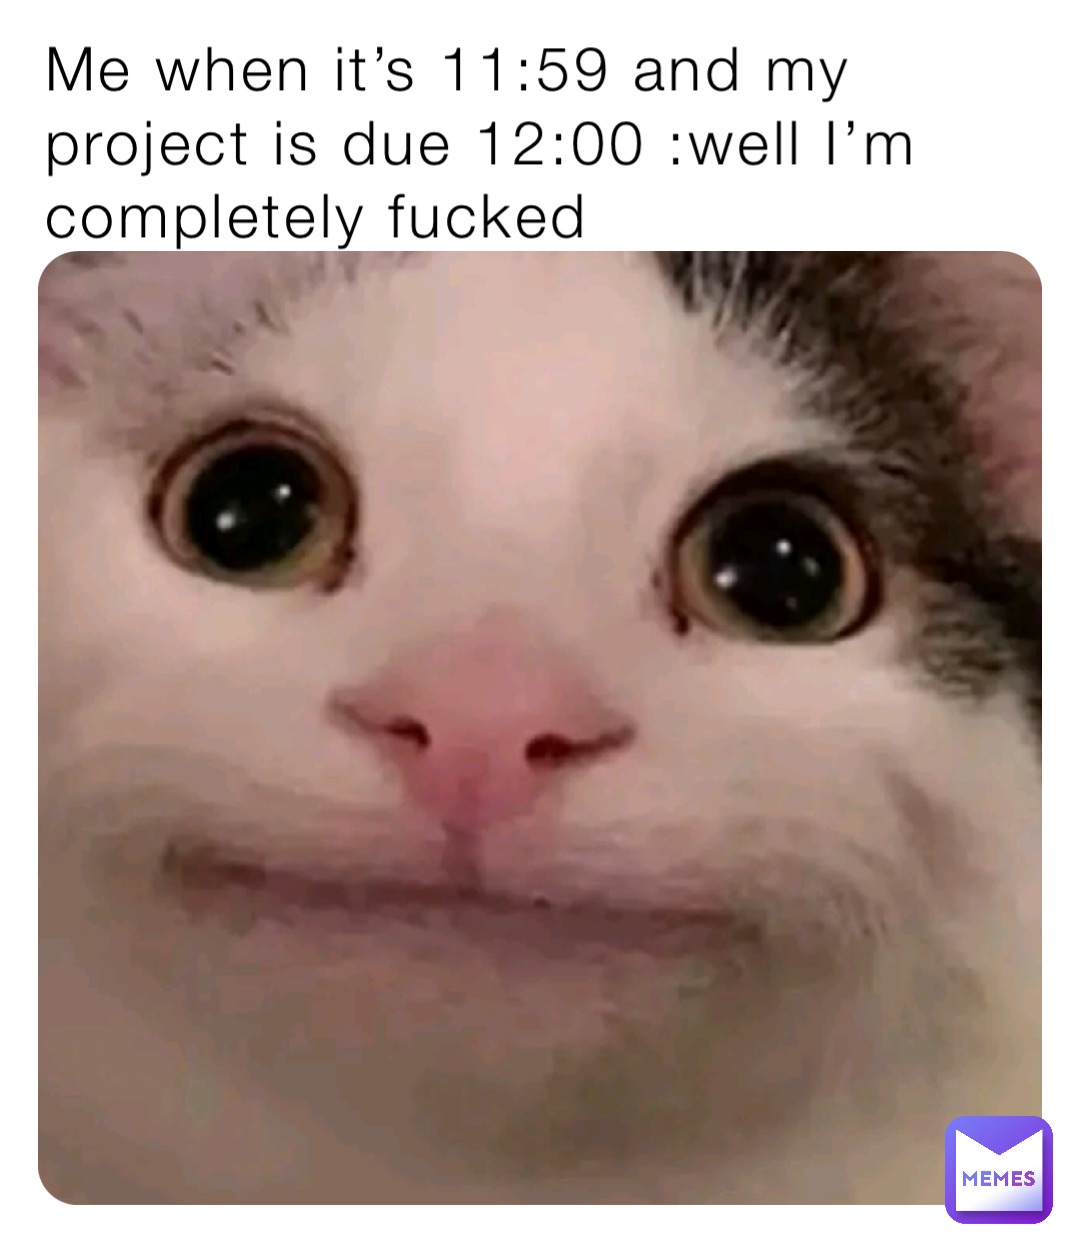 Me when it’s 11:59 and my project is due 12:00 :well I’m completely fucked